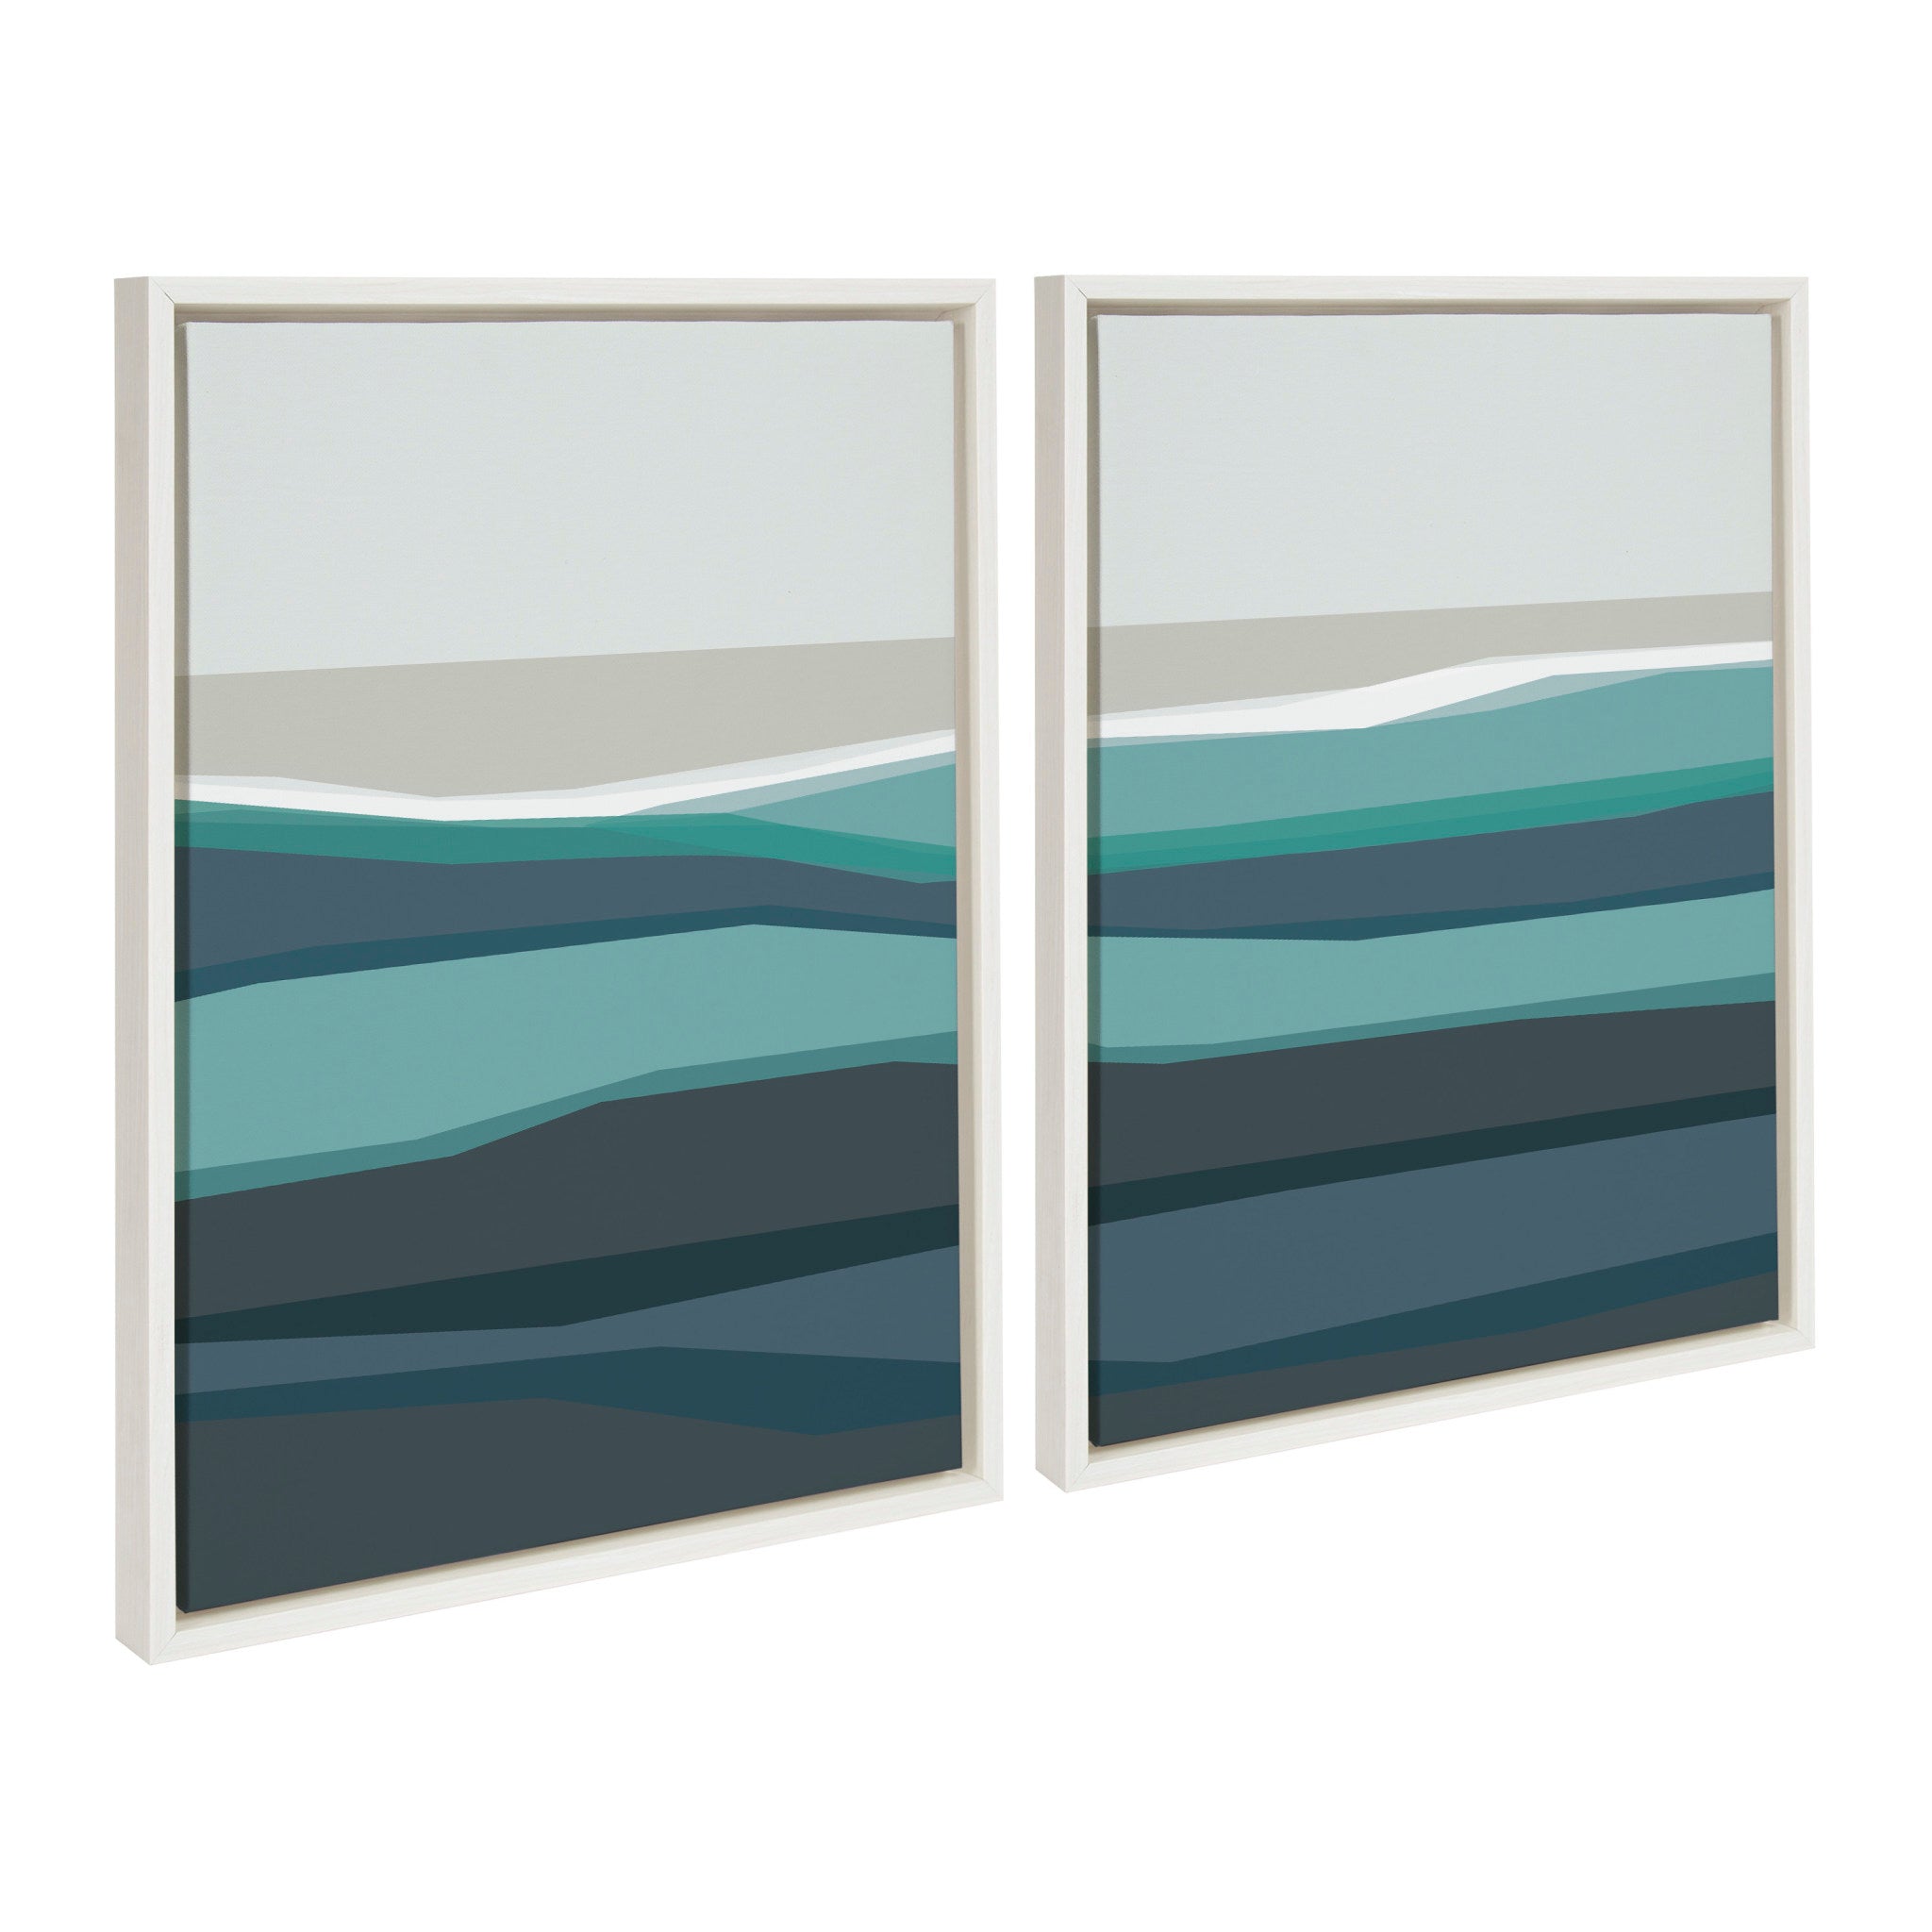 Sylvie Abstract Teal Beach Horizon Left and Right Framed Canvas by The Creative Bunch Studio